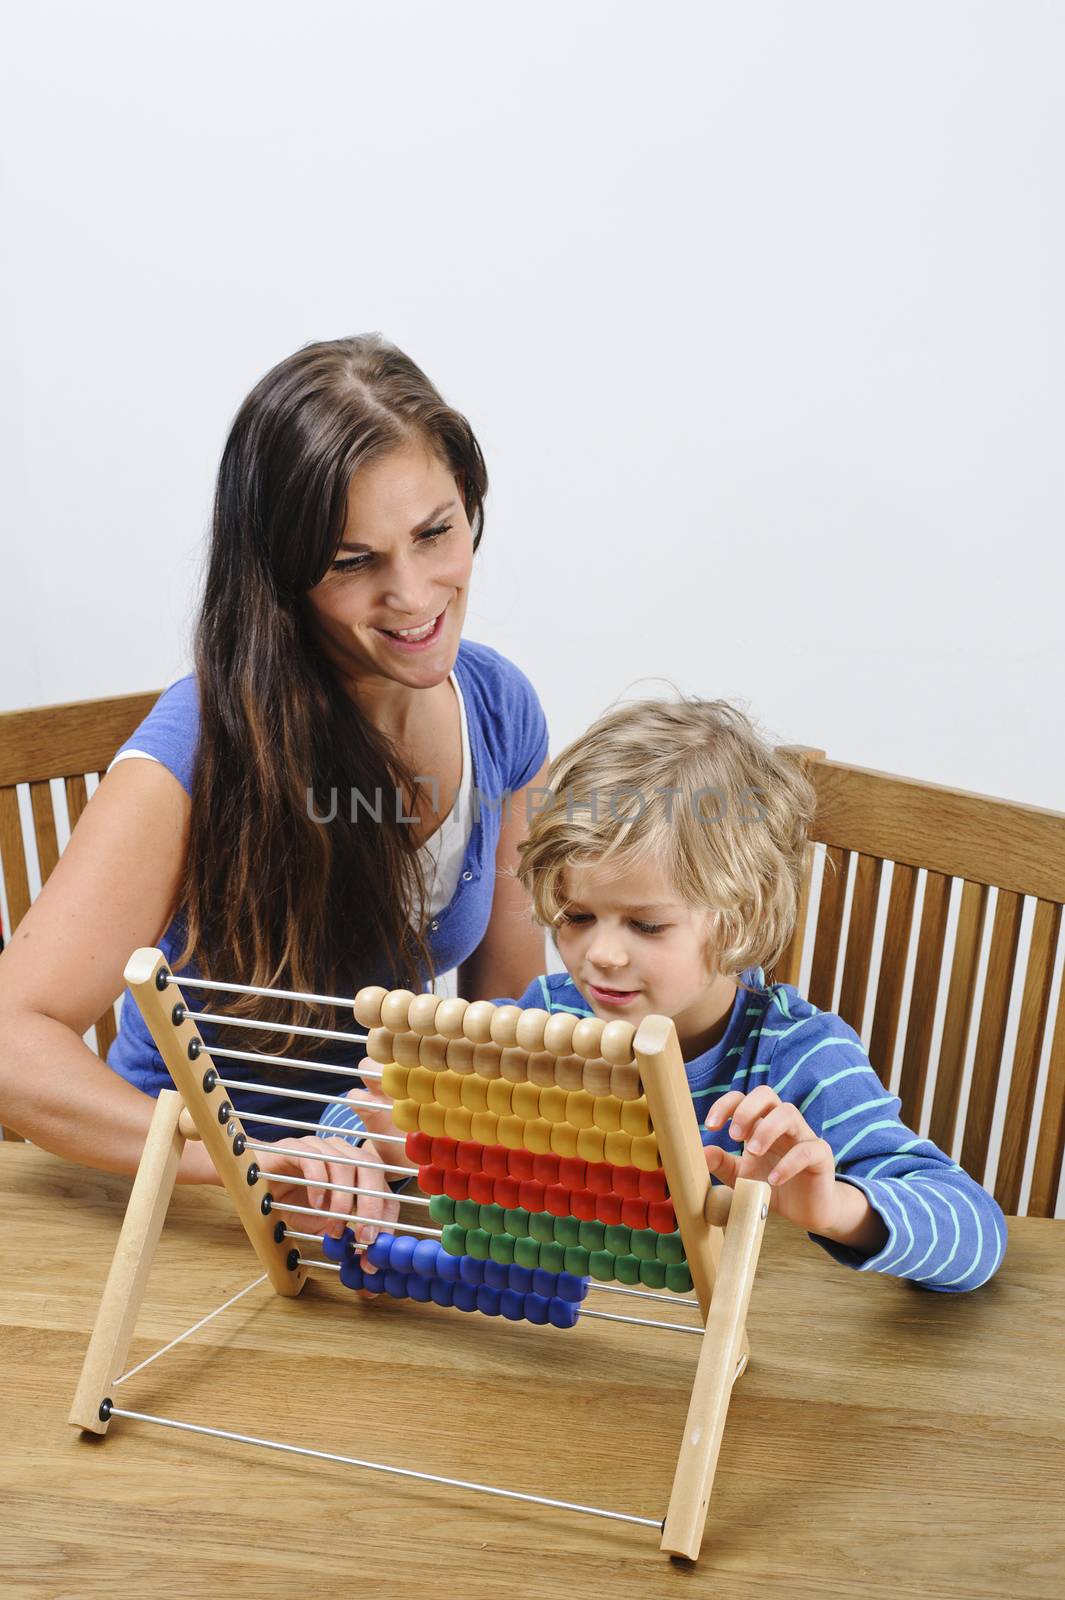 Mother teaches her son how to count using an abacus